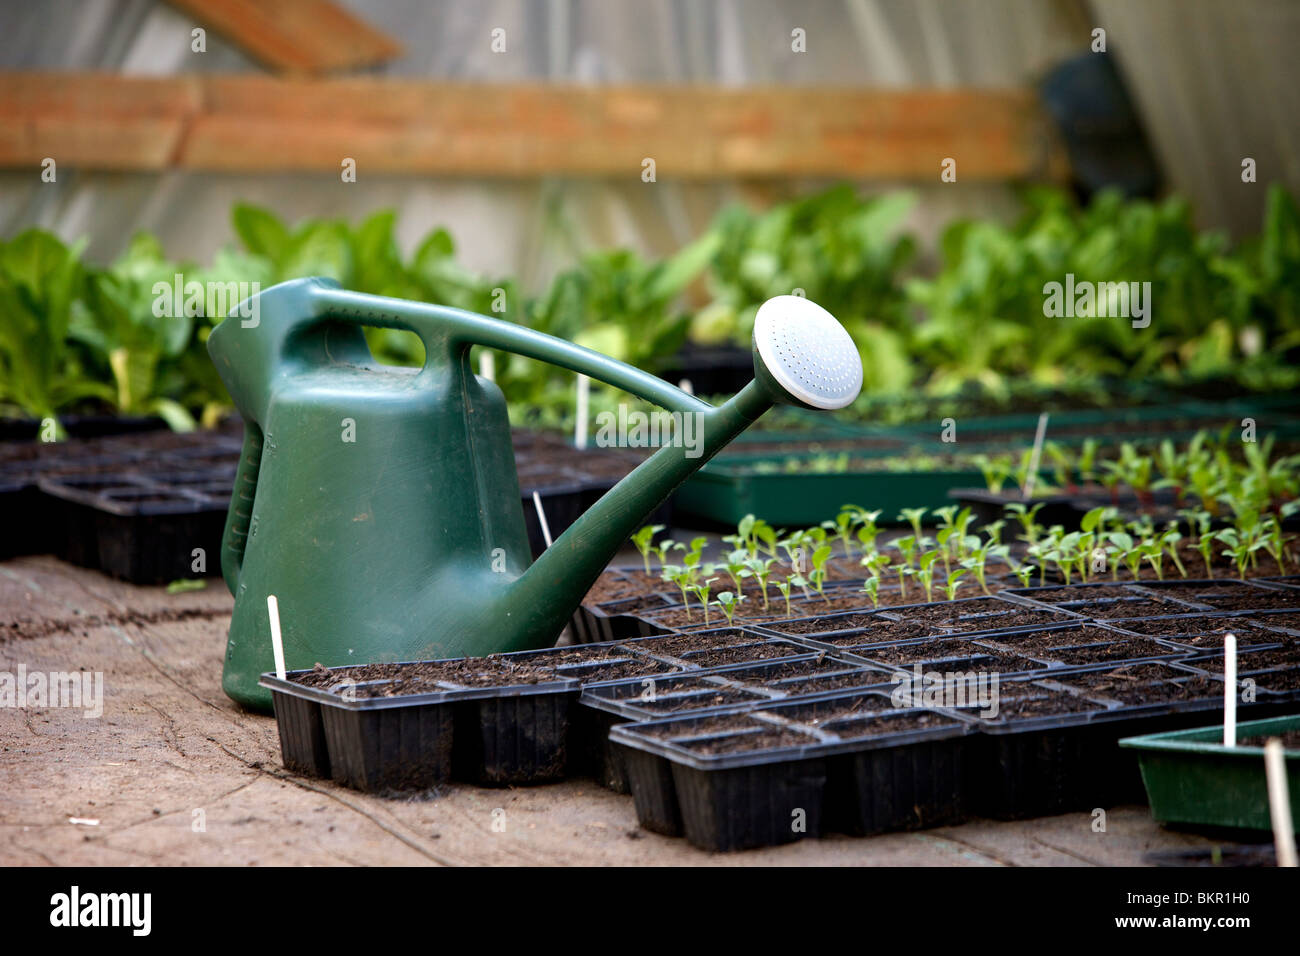 Watering can and trays of seedlings in a greenhouse Stock Photo